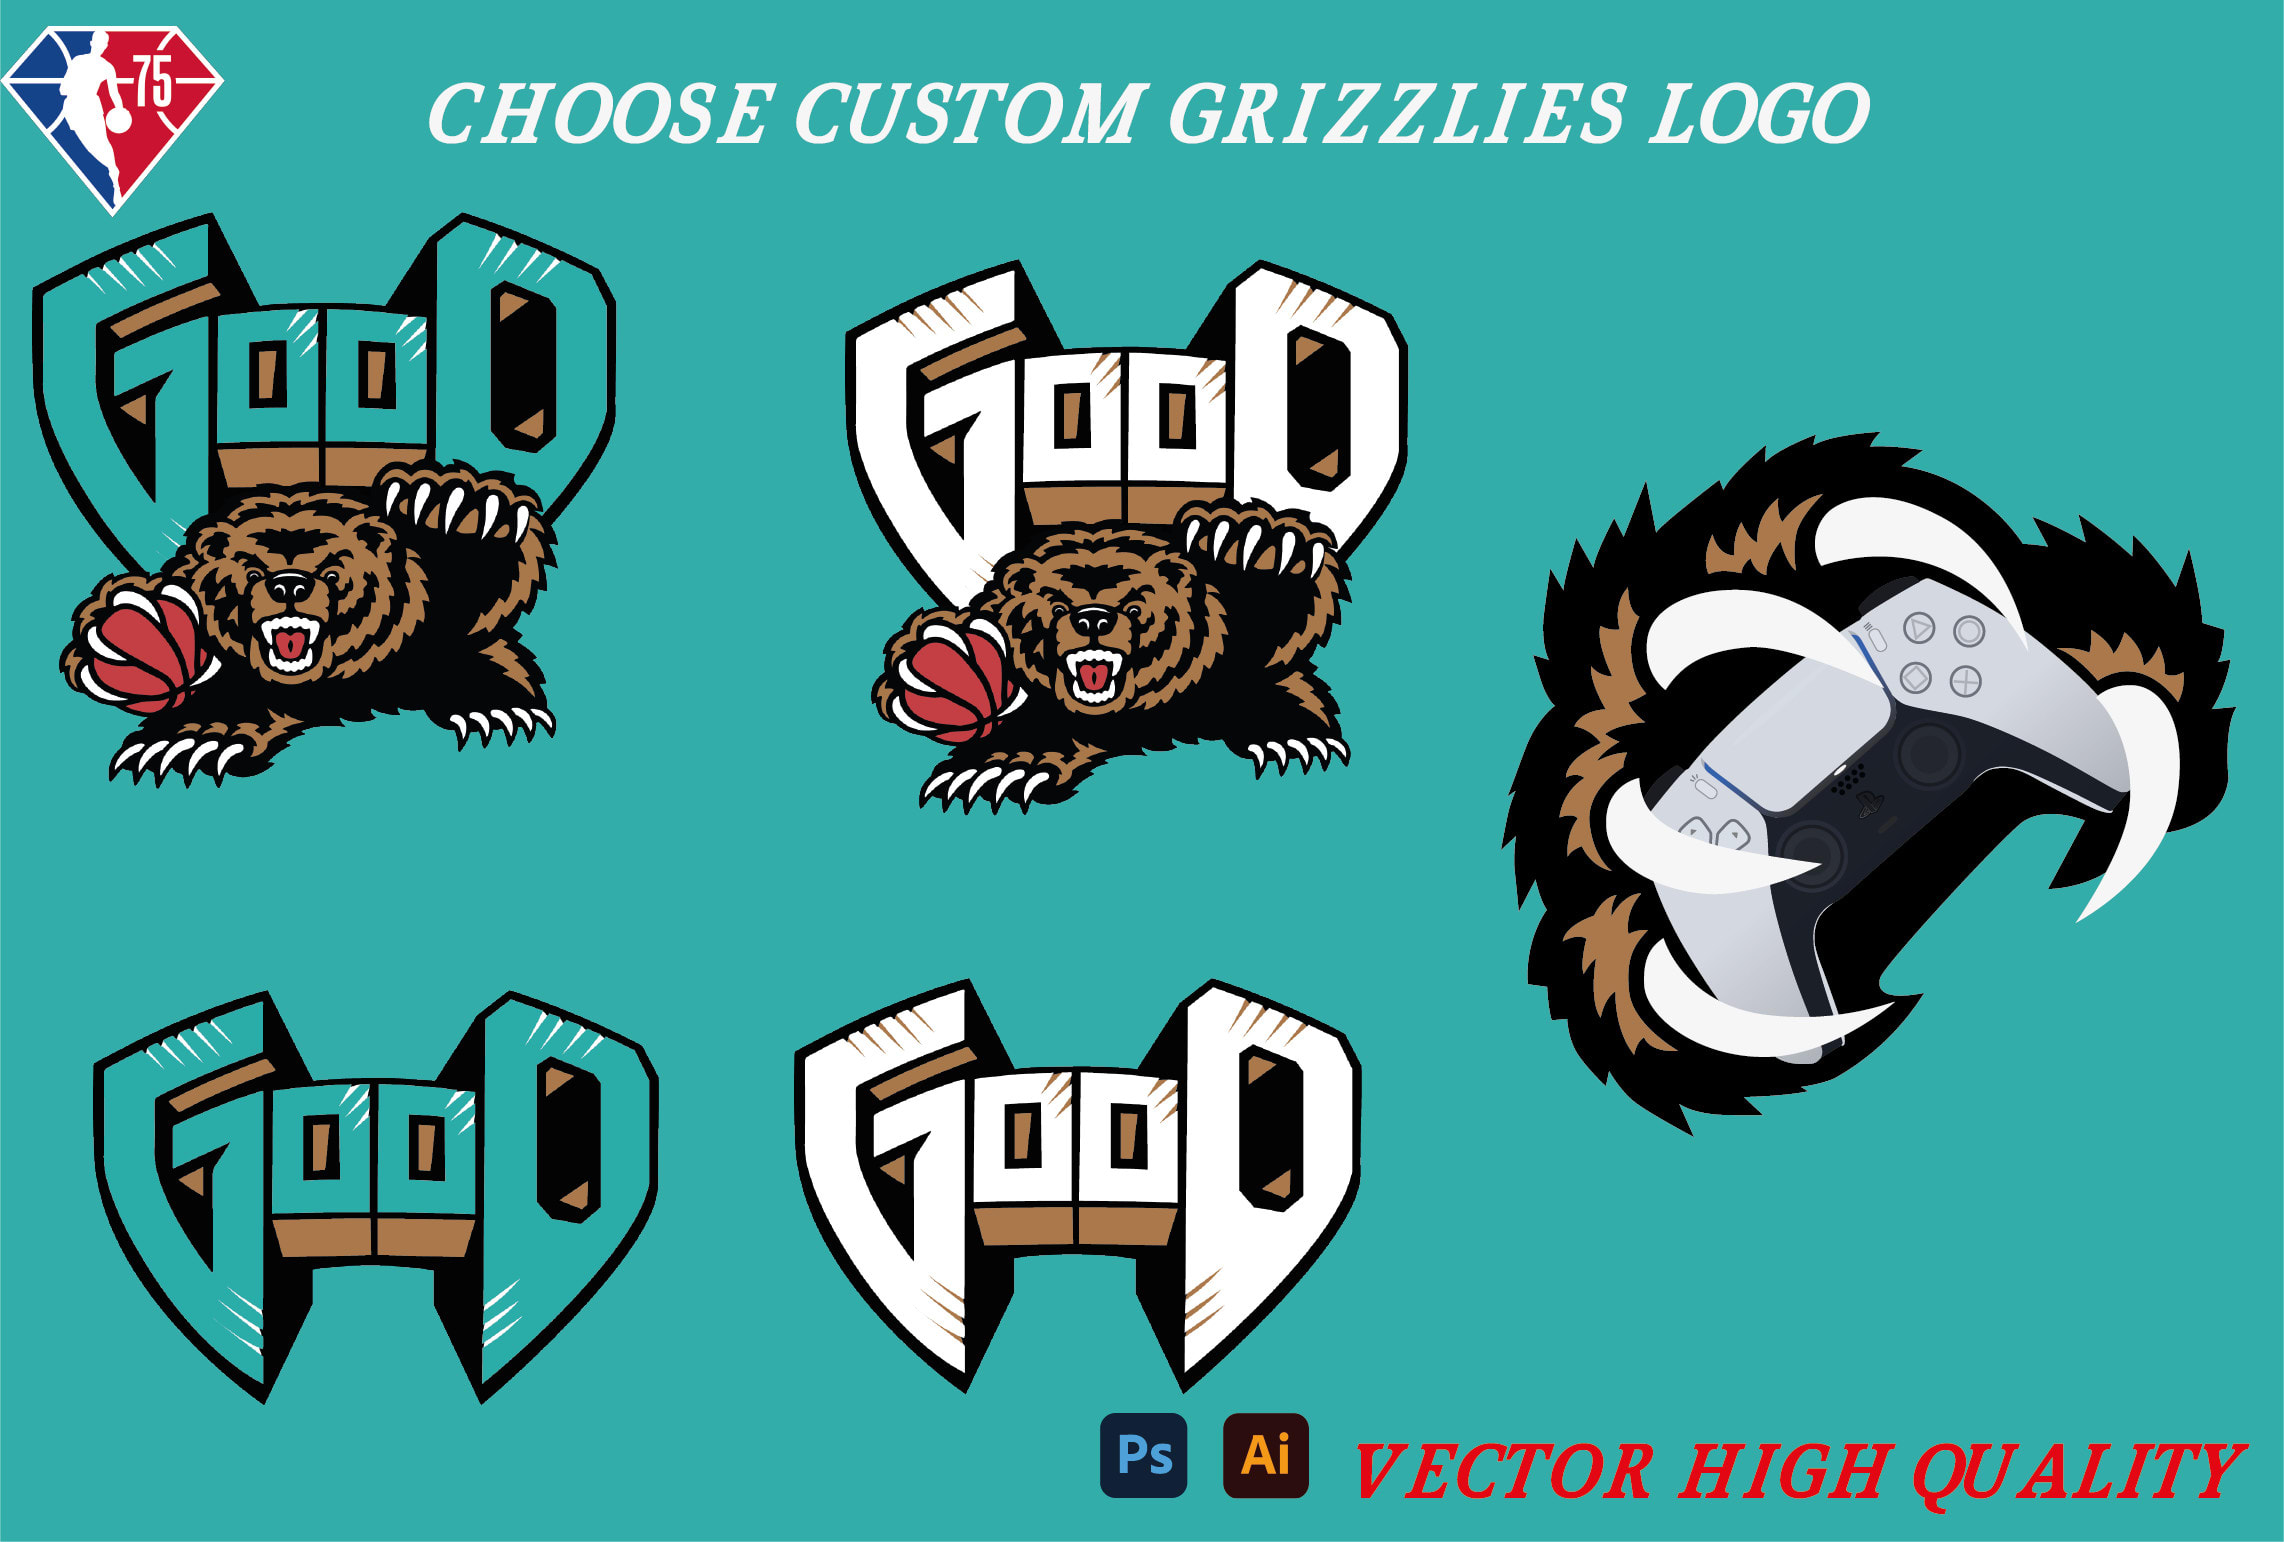 Based on Vancouver Grizzlies: Incredible Memphis Grizzlies Concepts